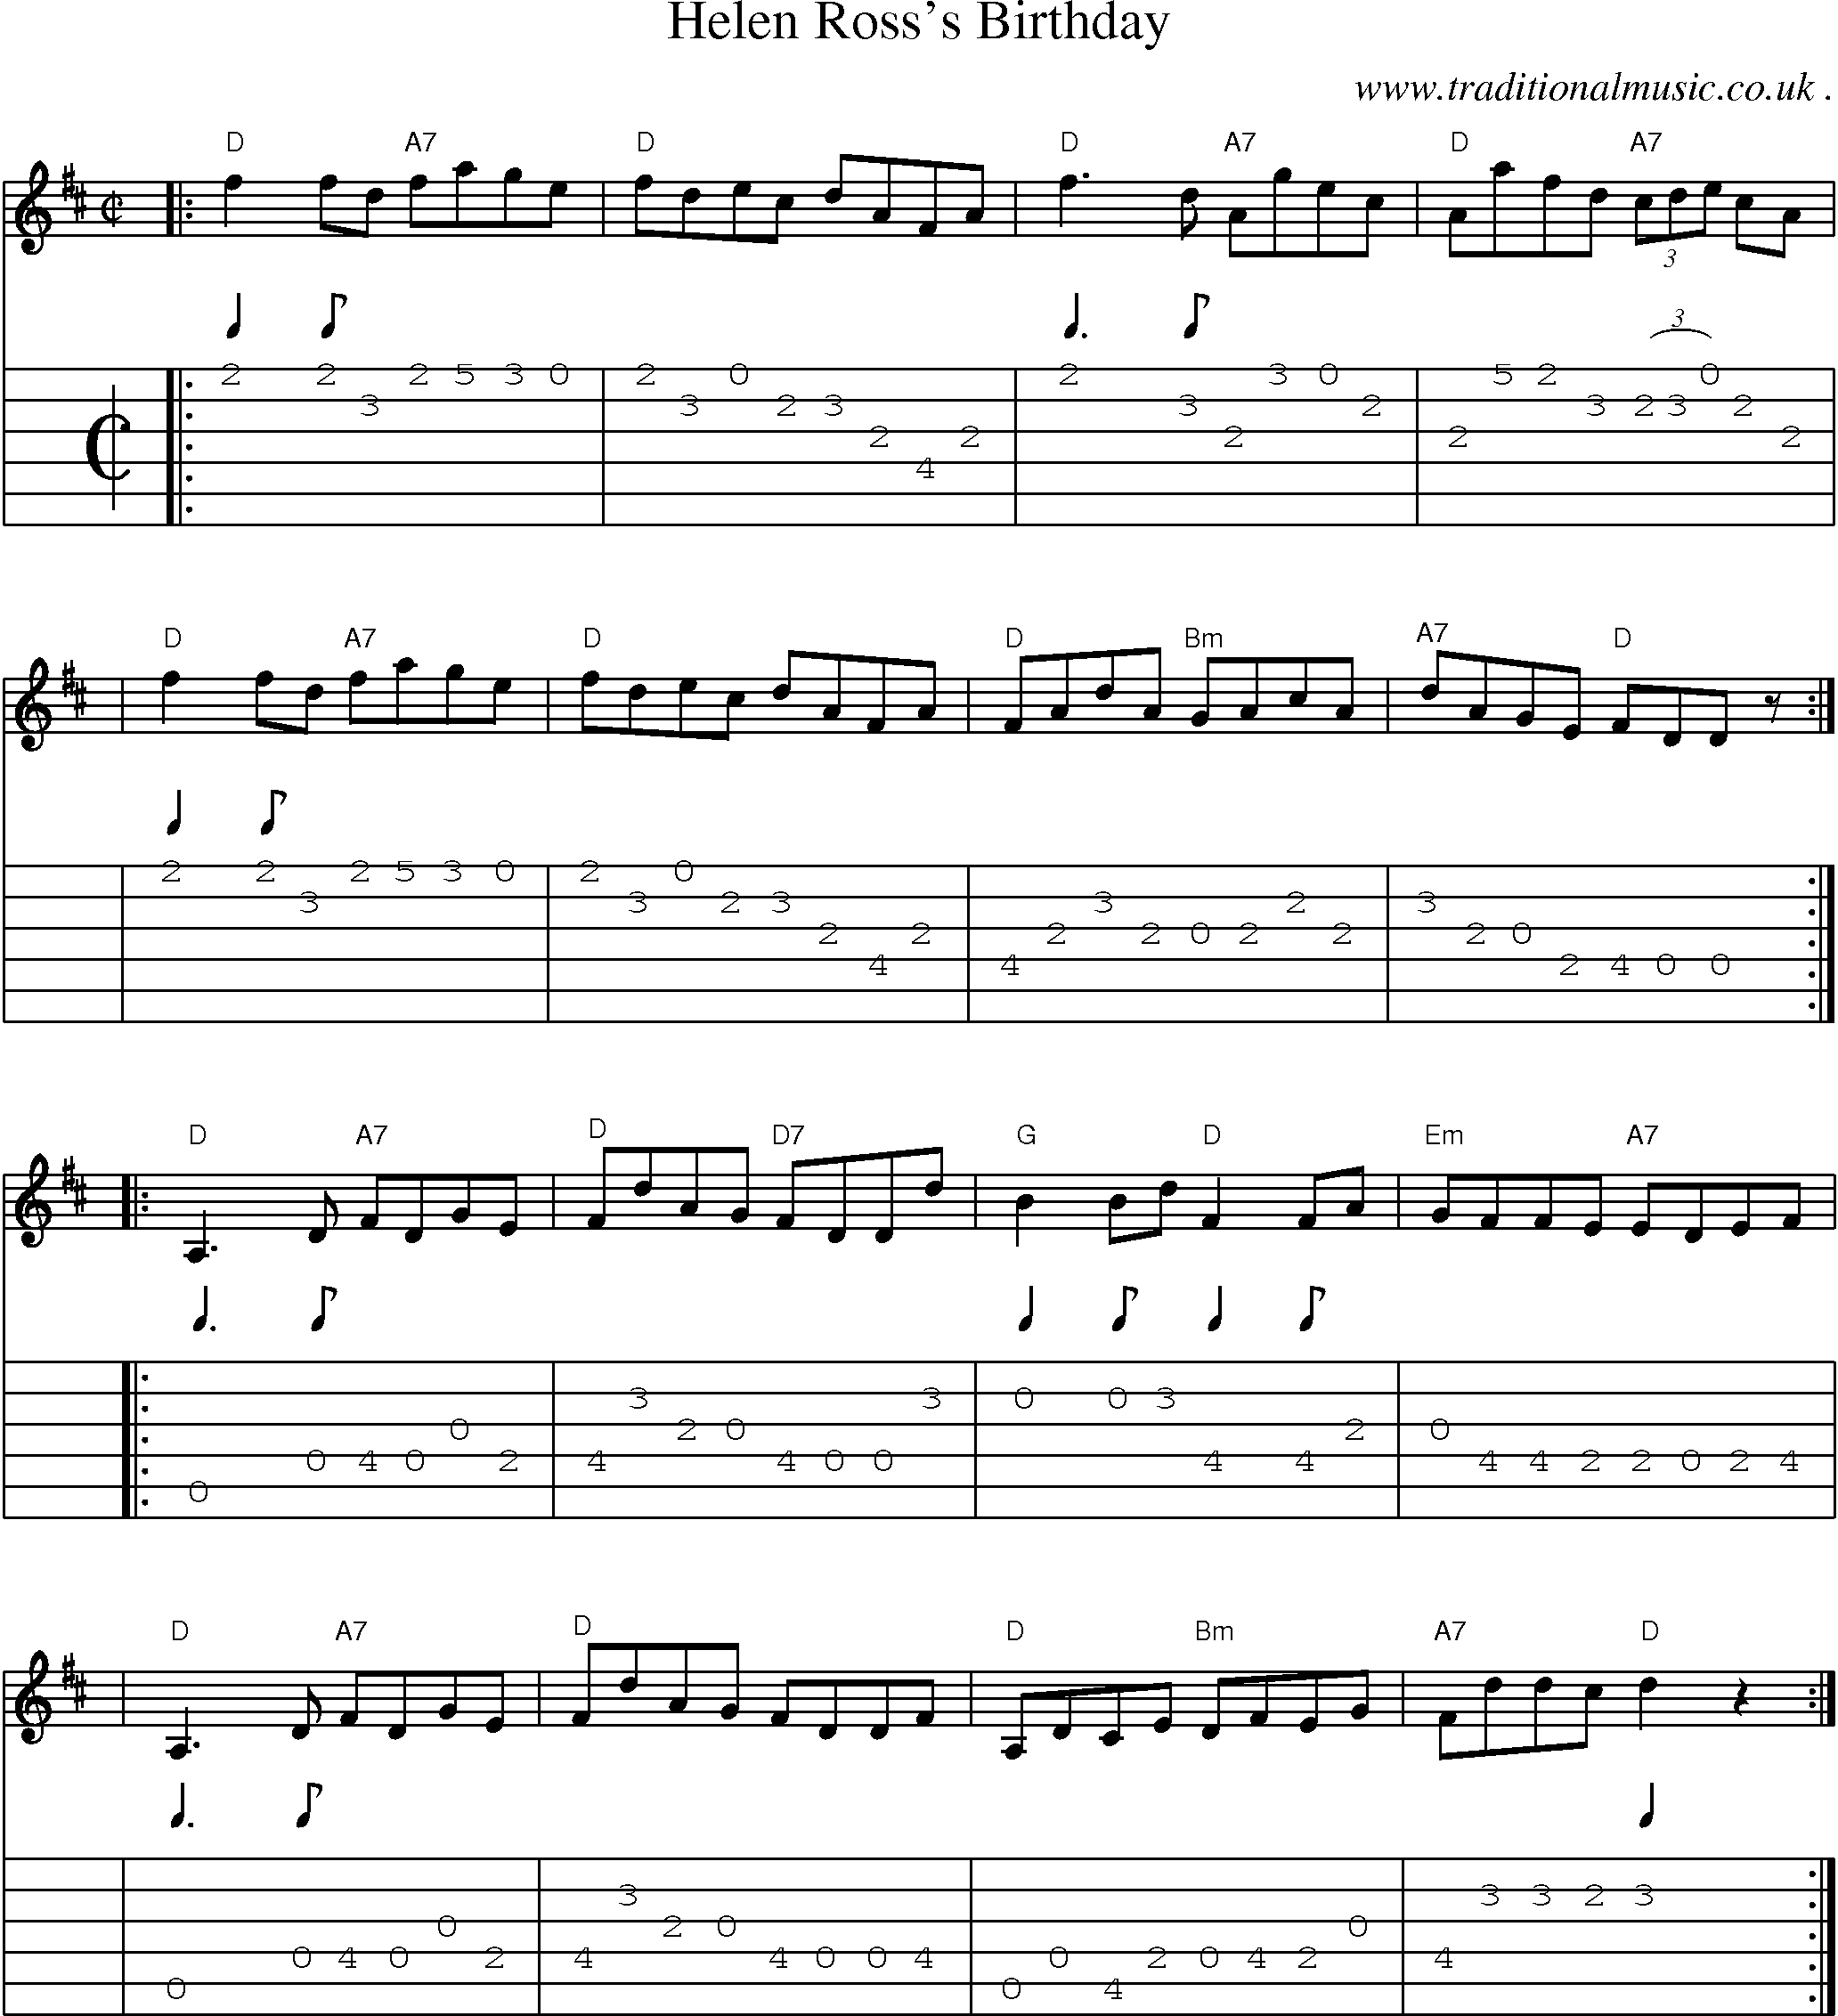 Sheet-music  score, Chords and Guitar Tabs for Helen Rosss Birthday